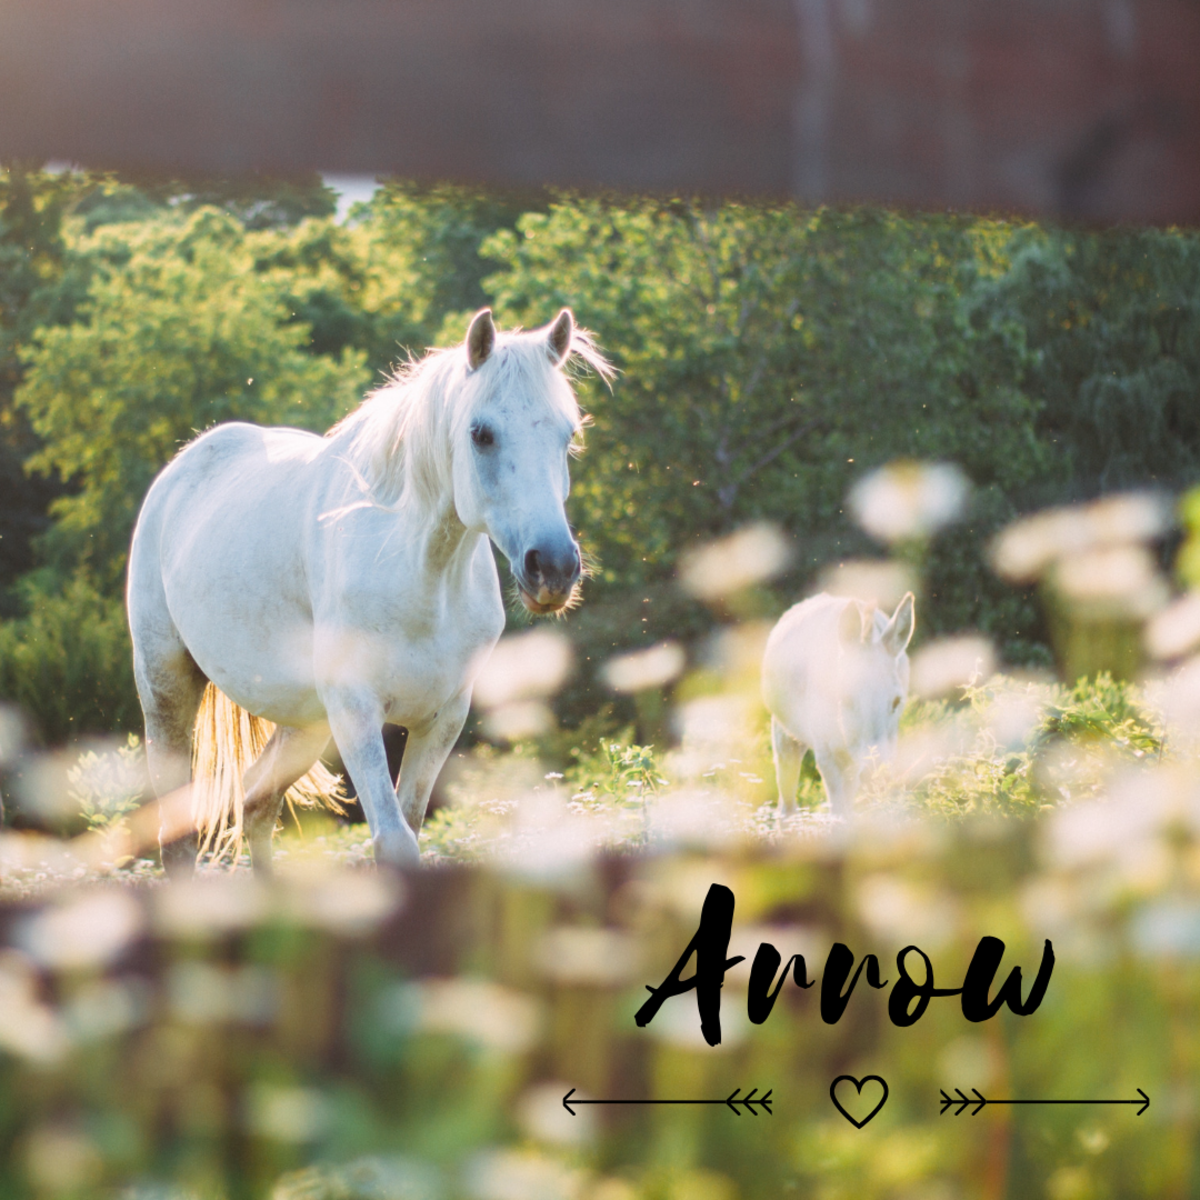 Is your mare an Arrow?